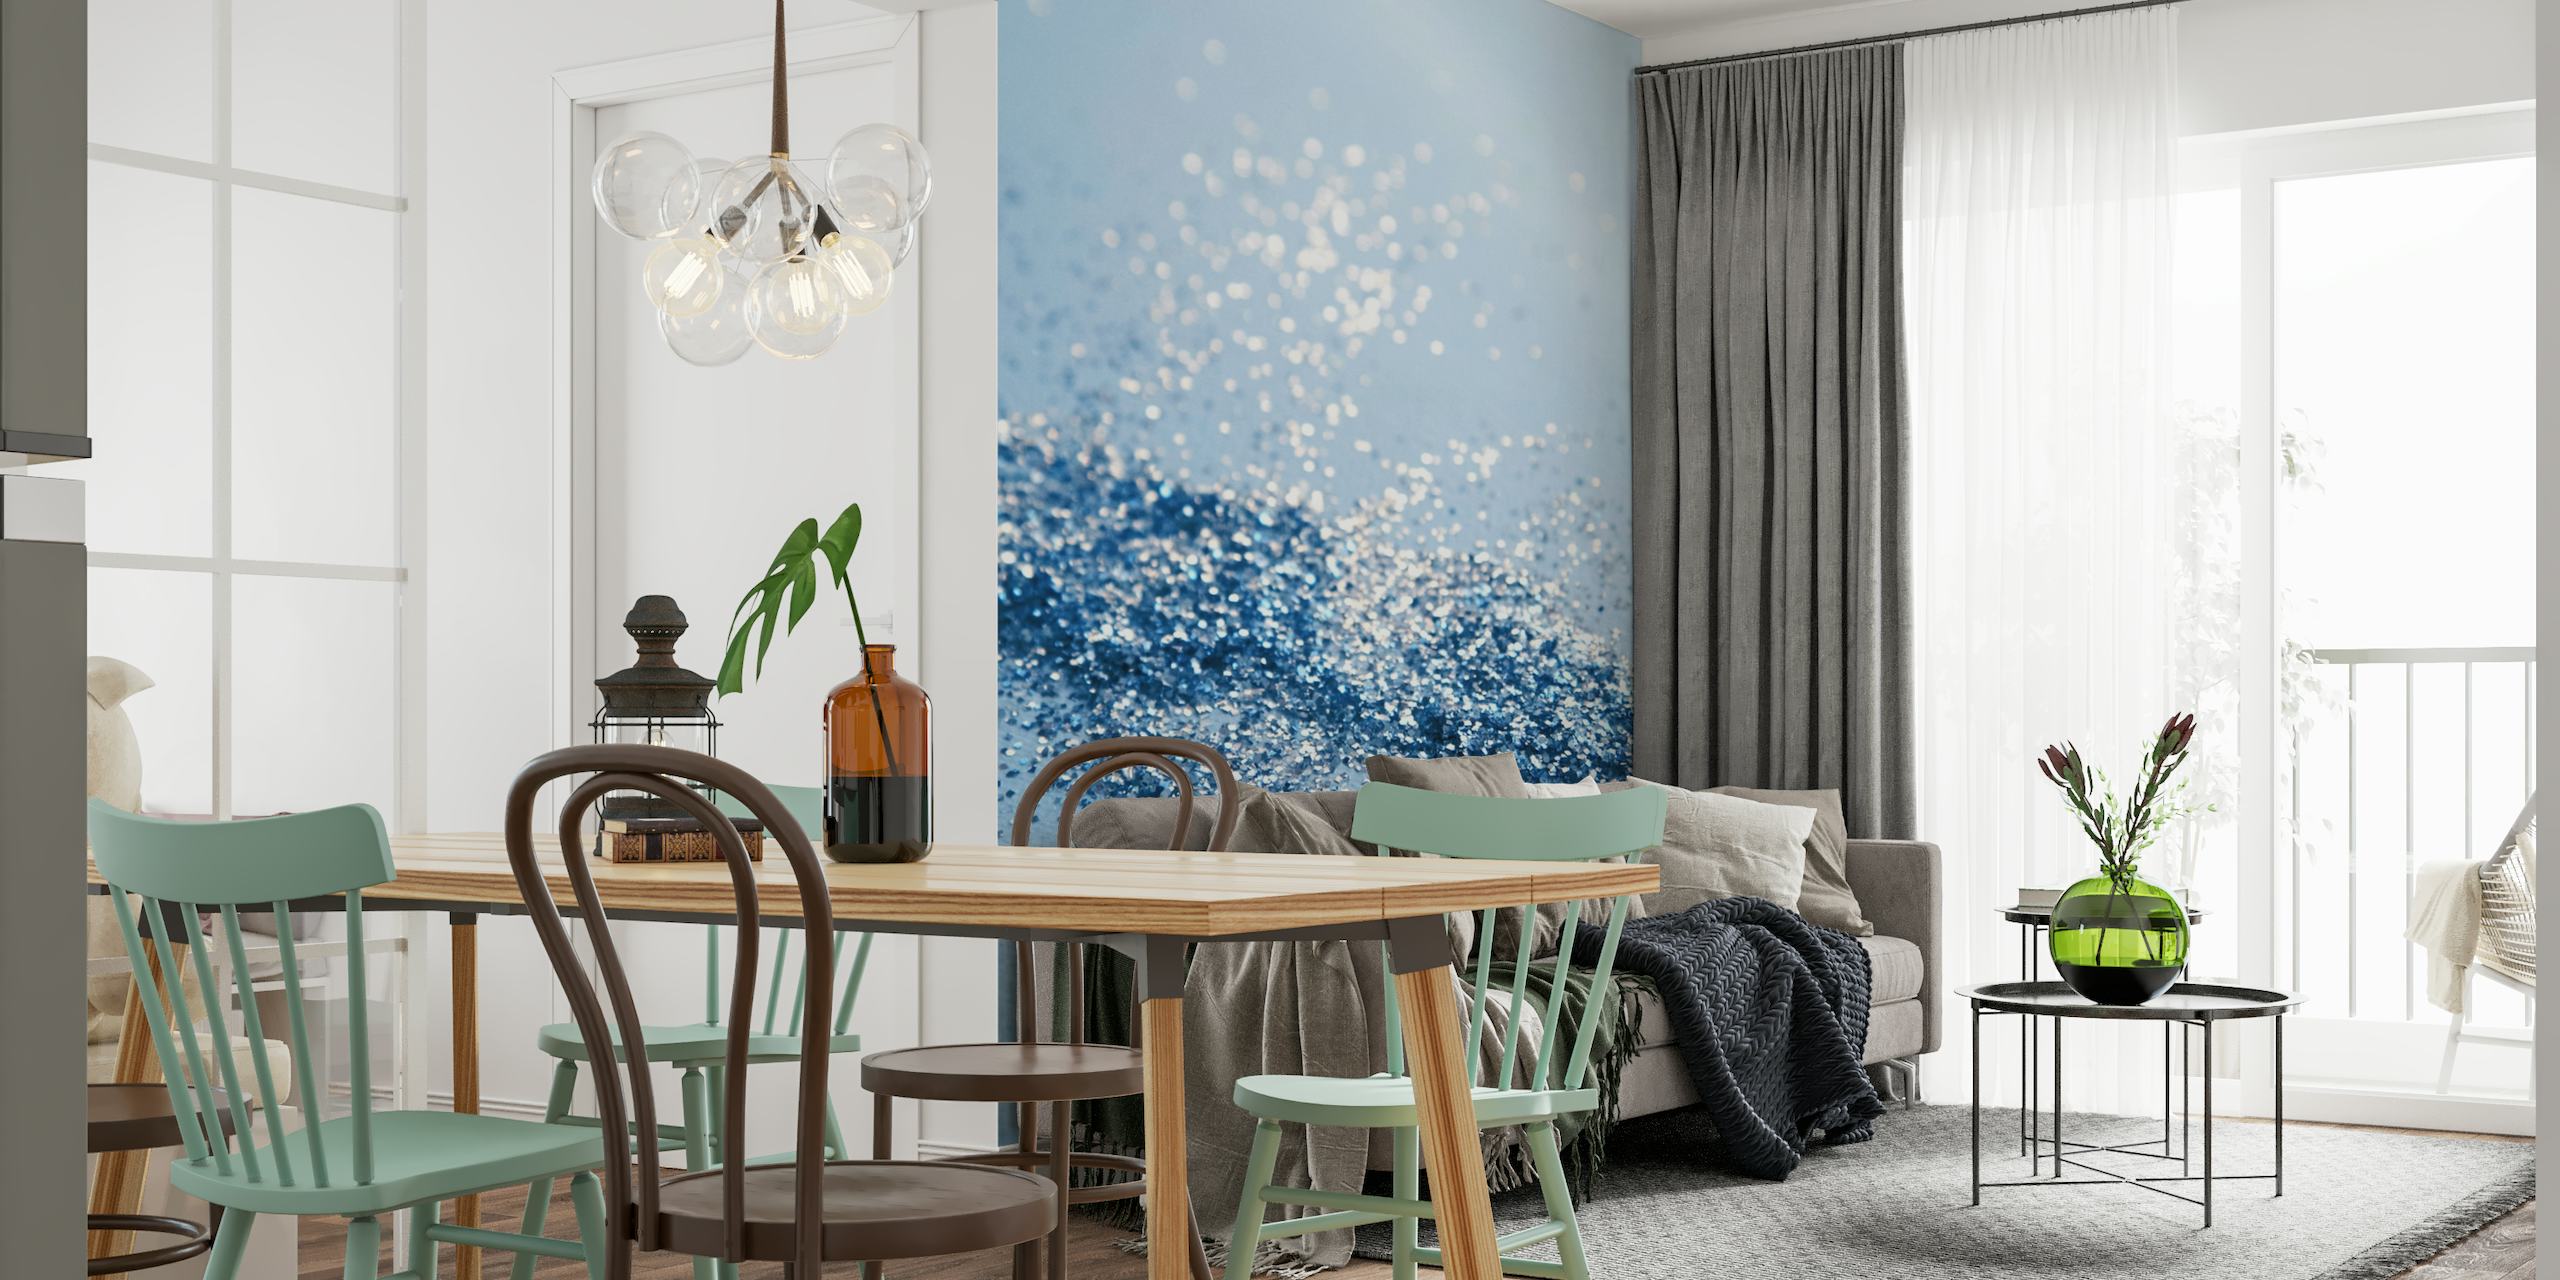 Glittery blue texture wall mural for sophisticated decor